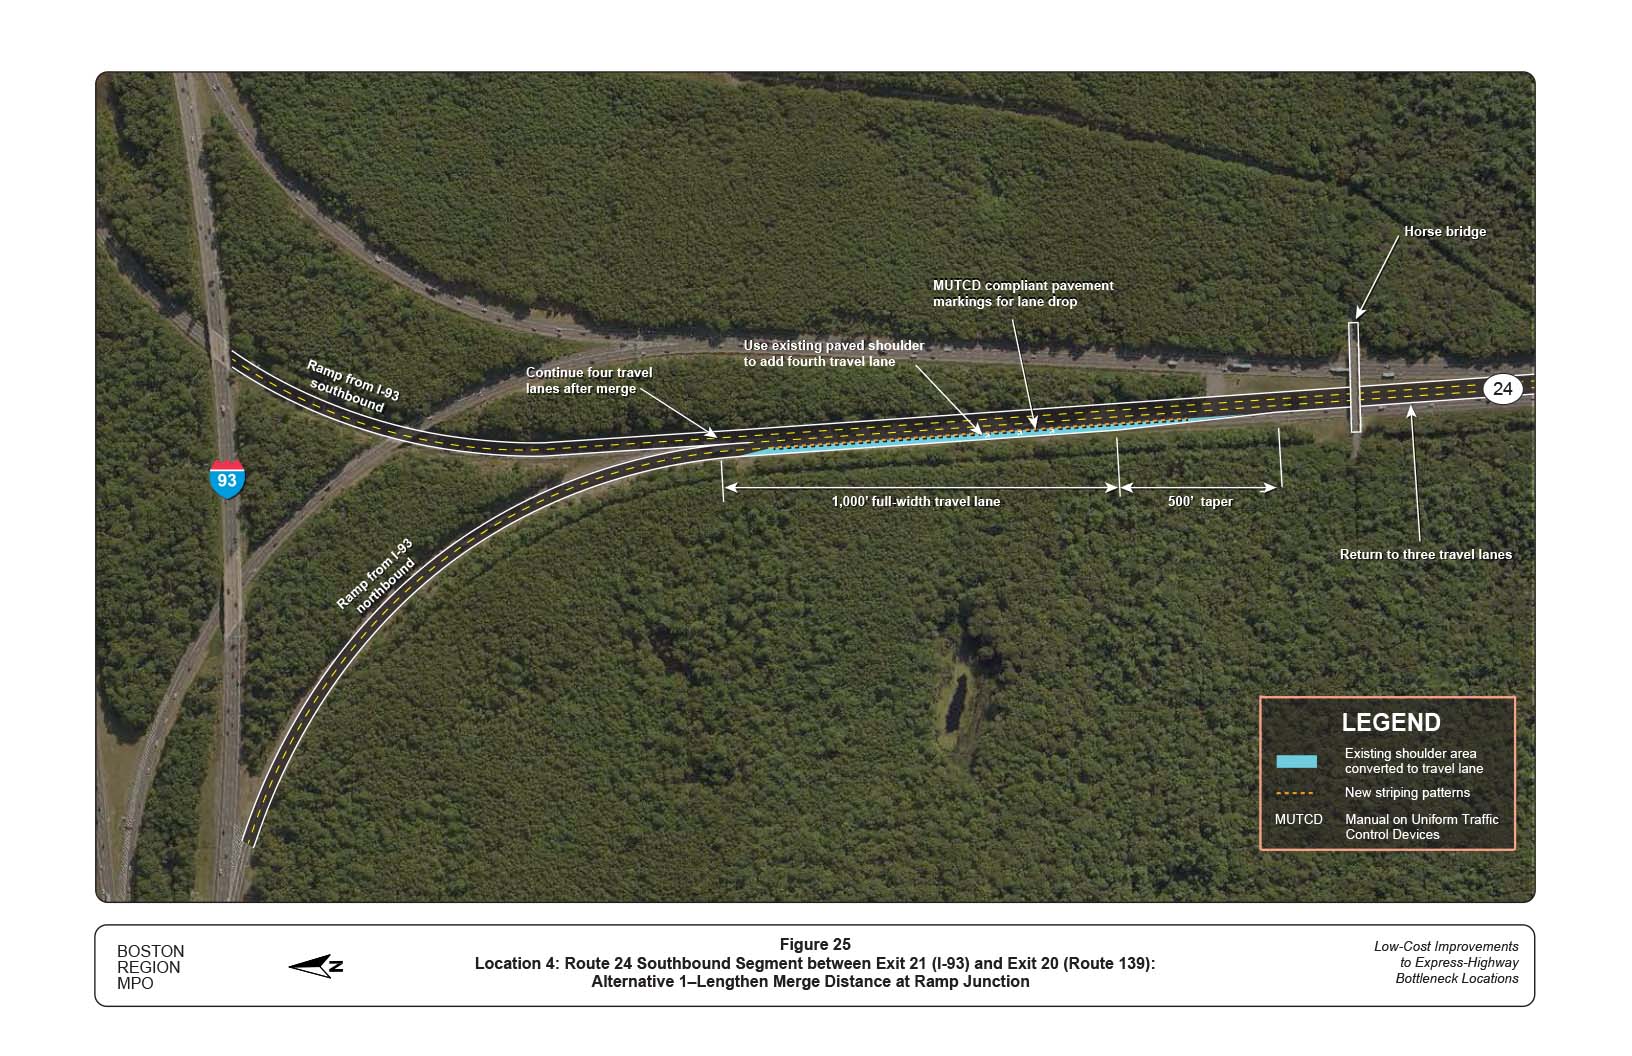 FIGURE 25. Location 4: Route 24 Southbound Segment between Exit 21 (I-93) and Exit 20 (Route 139): Alternative 1–Lengthen Merge Distance at Ramp Junction
Figure 25 shows an improvement alternative for Route 24 southbound segment between Exit 21 and Exit 20. The figure shows the lengthening of the merge distance at the ramp junction by using the existing right-hand paved shoulder to add a fourth travel lane beginning at the merge and continuing 1,000 feet downstream.
